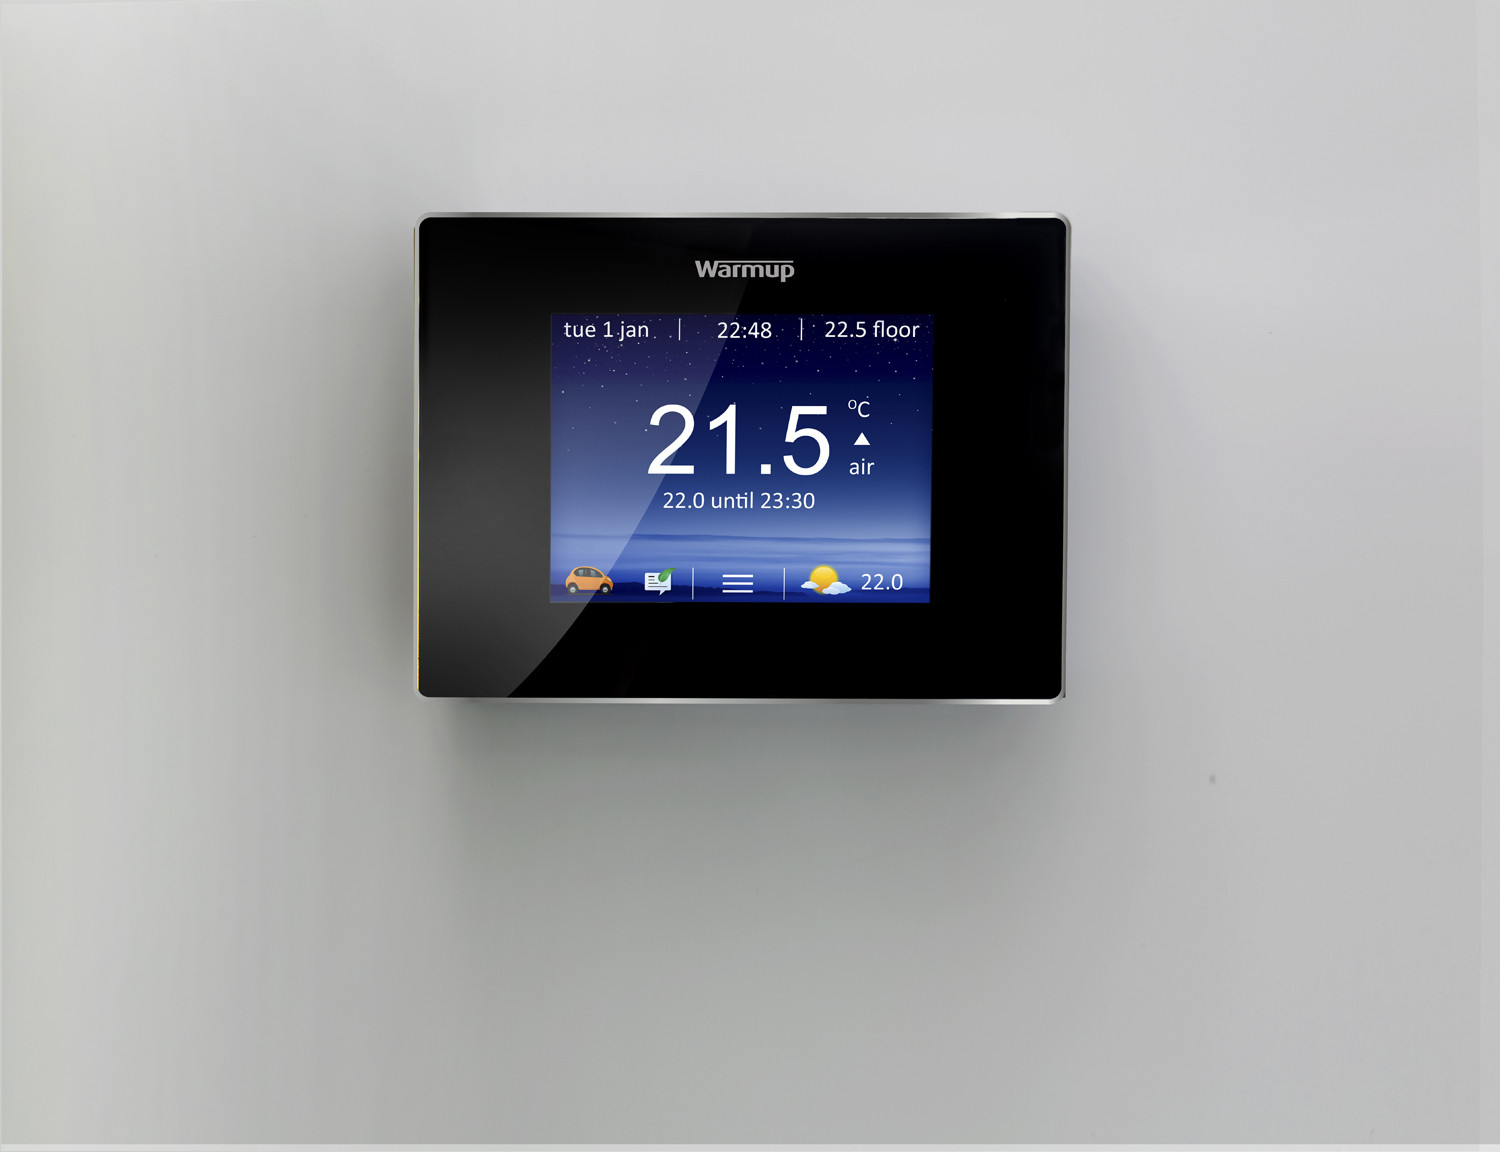 4iE Smart WiFi Thermostat - Warmup